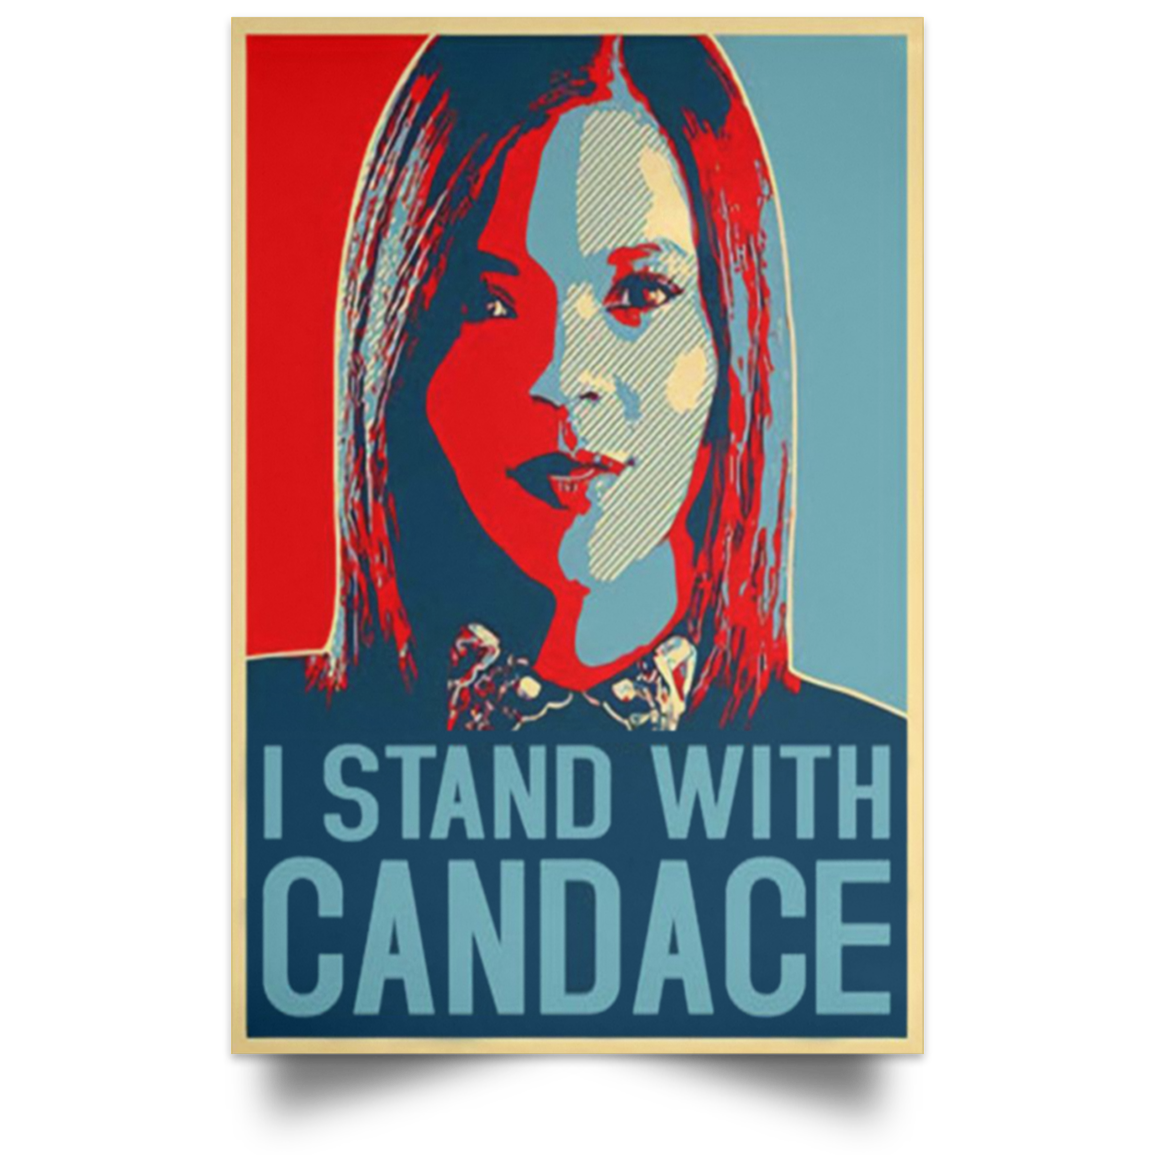 Candace Owens 2024 Poster Merch I Stand With Candace Political Campaign